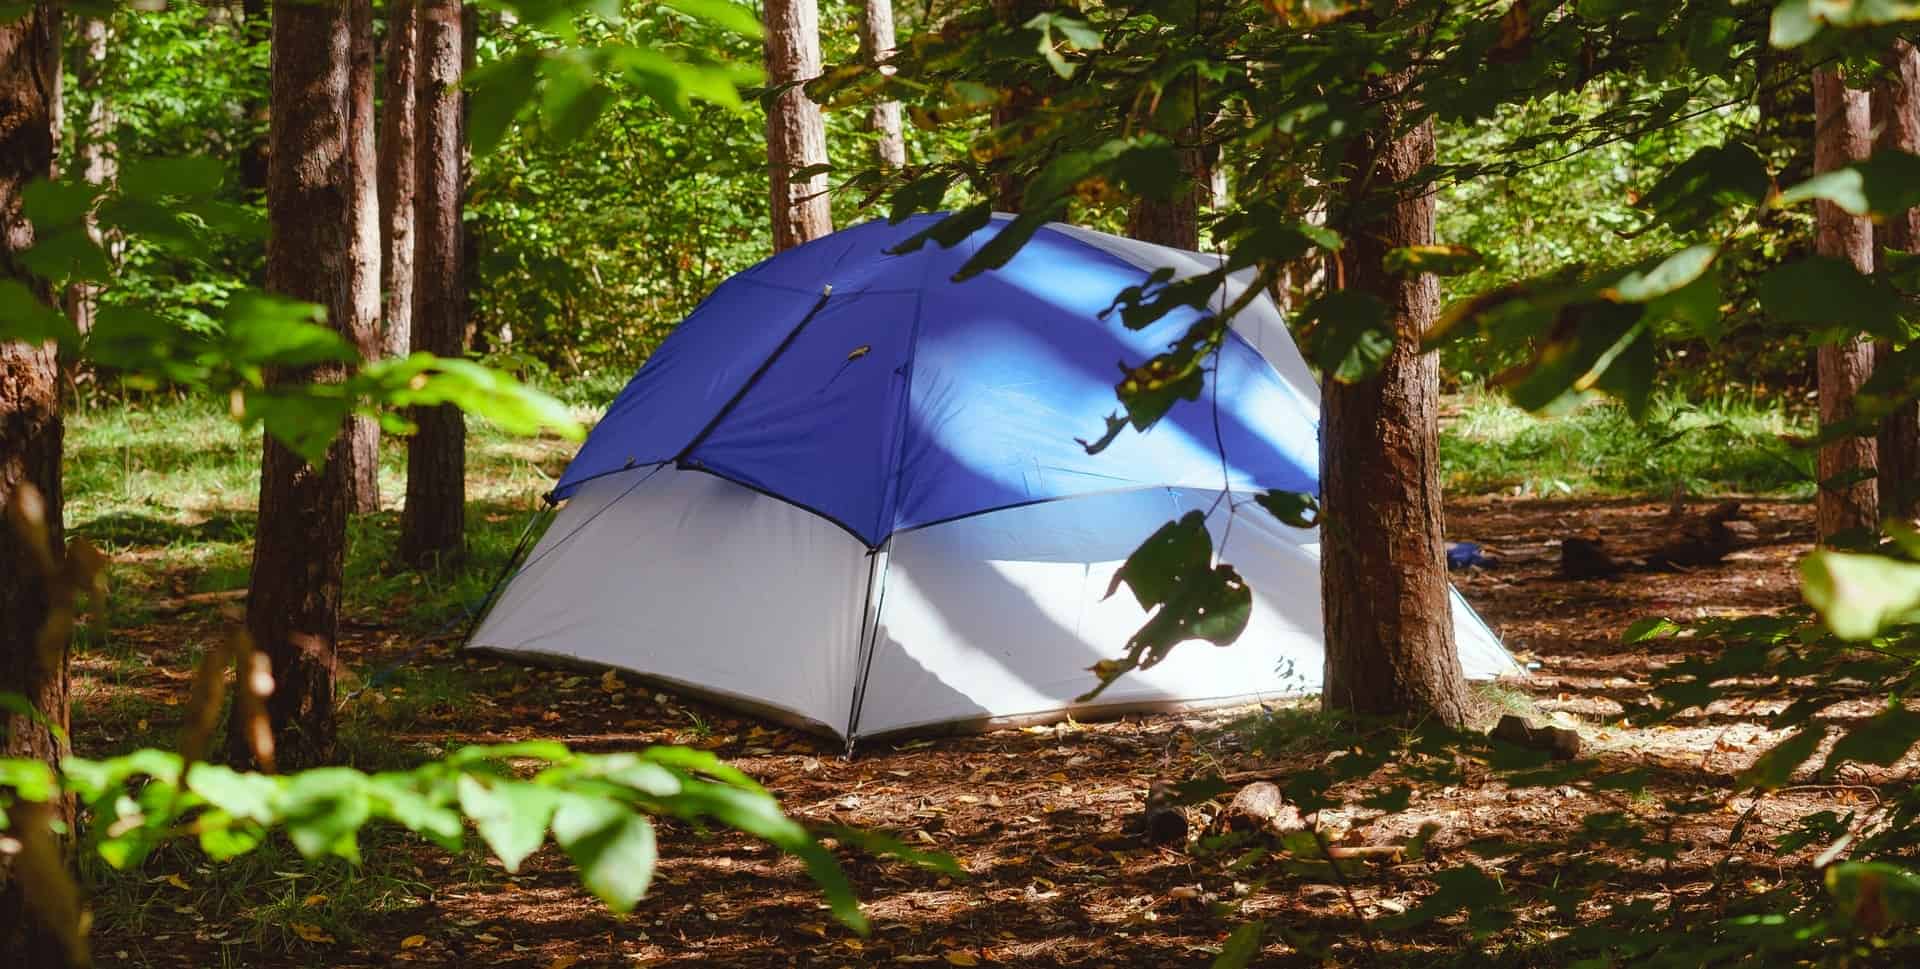 Blue and white tent set up in a forest